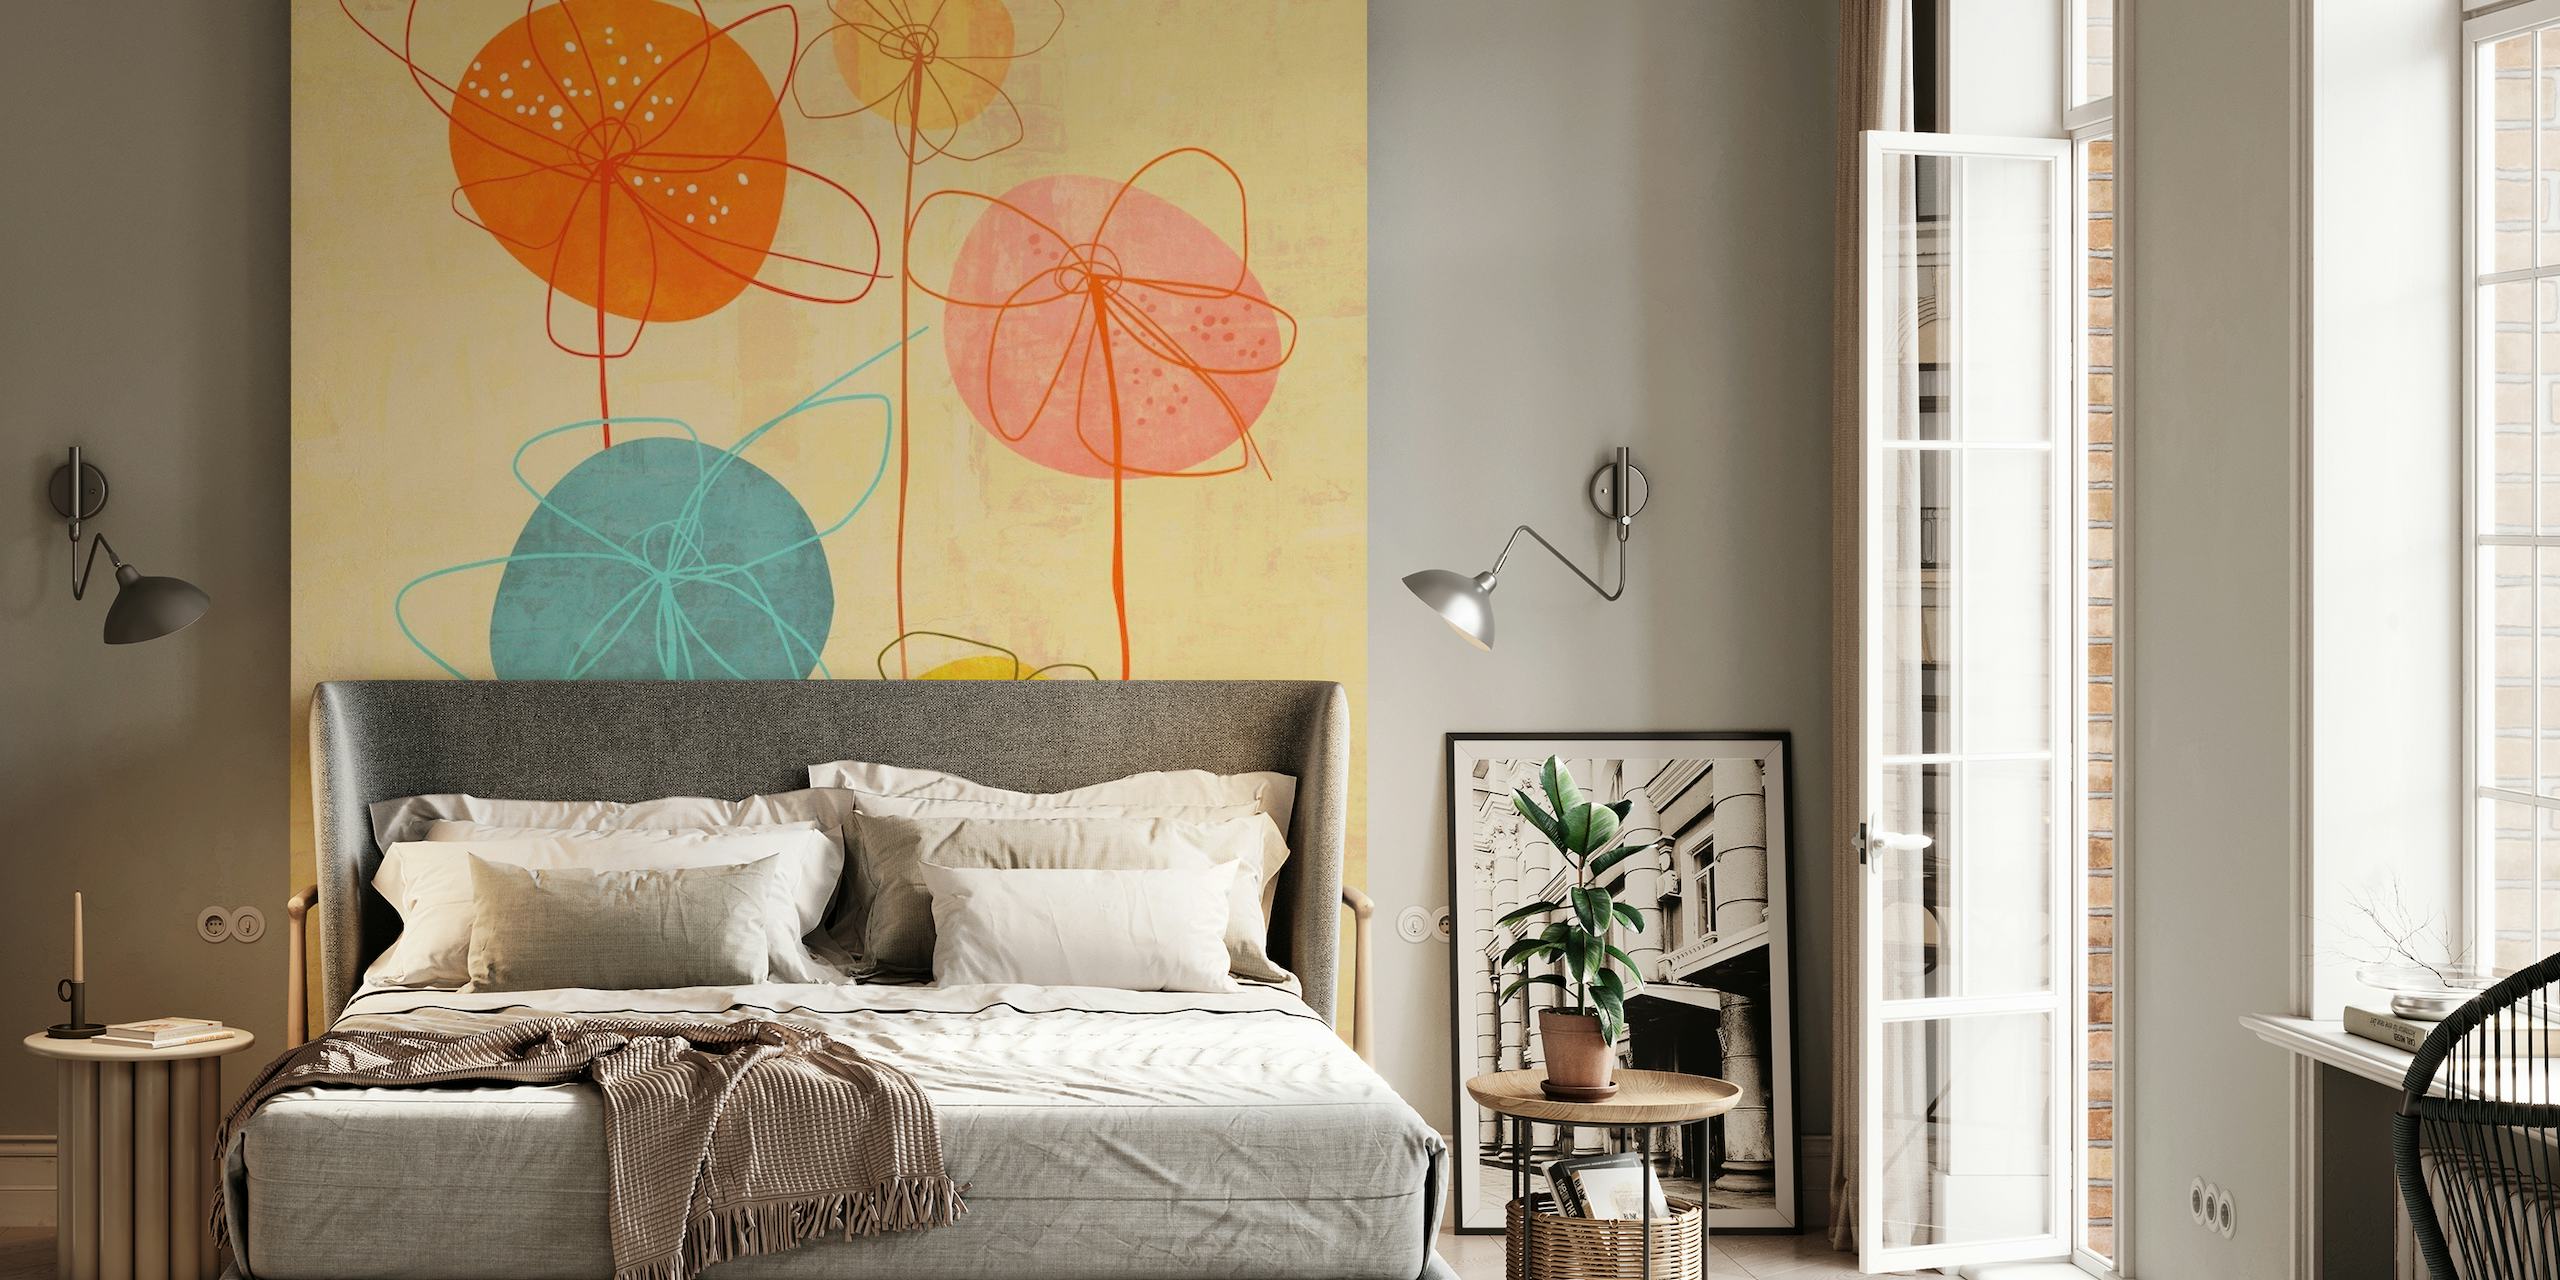 Stylized abstract flowers wall mural in orange, blue, and yellow tones with a textured background.